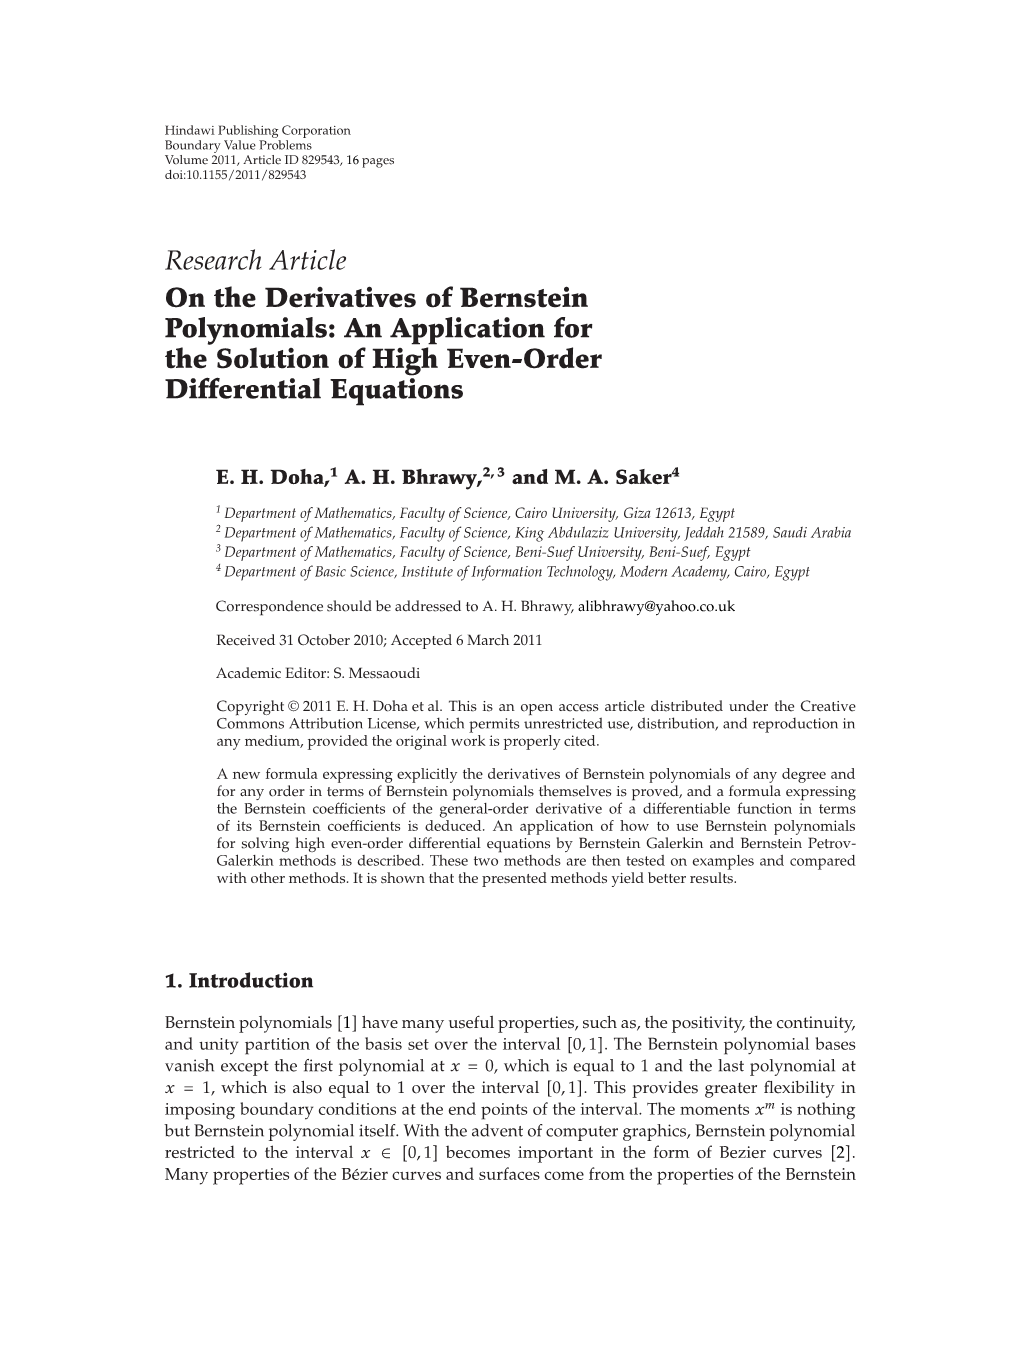 Research Article on the Derivatives of Bernstein Polynomials: an Application for the Solution of High Even-Order Differential Equations